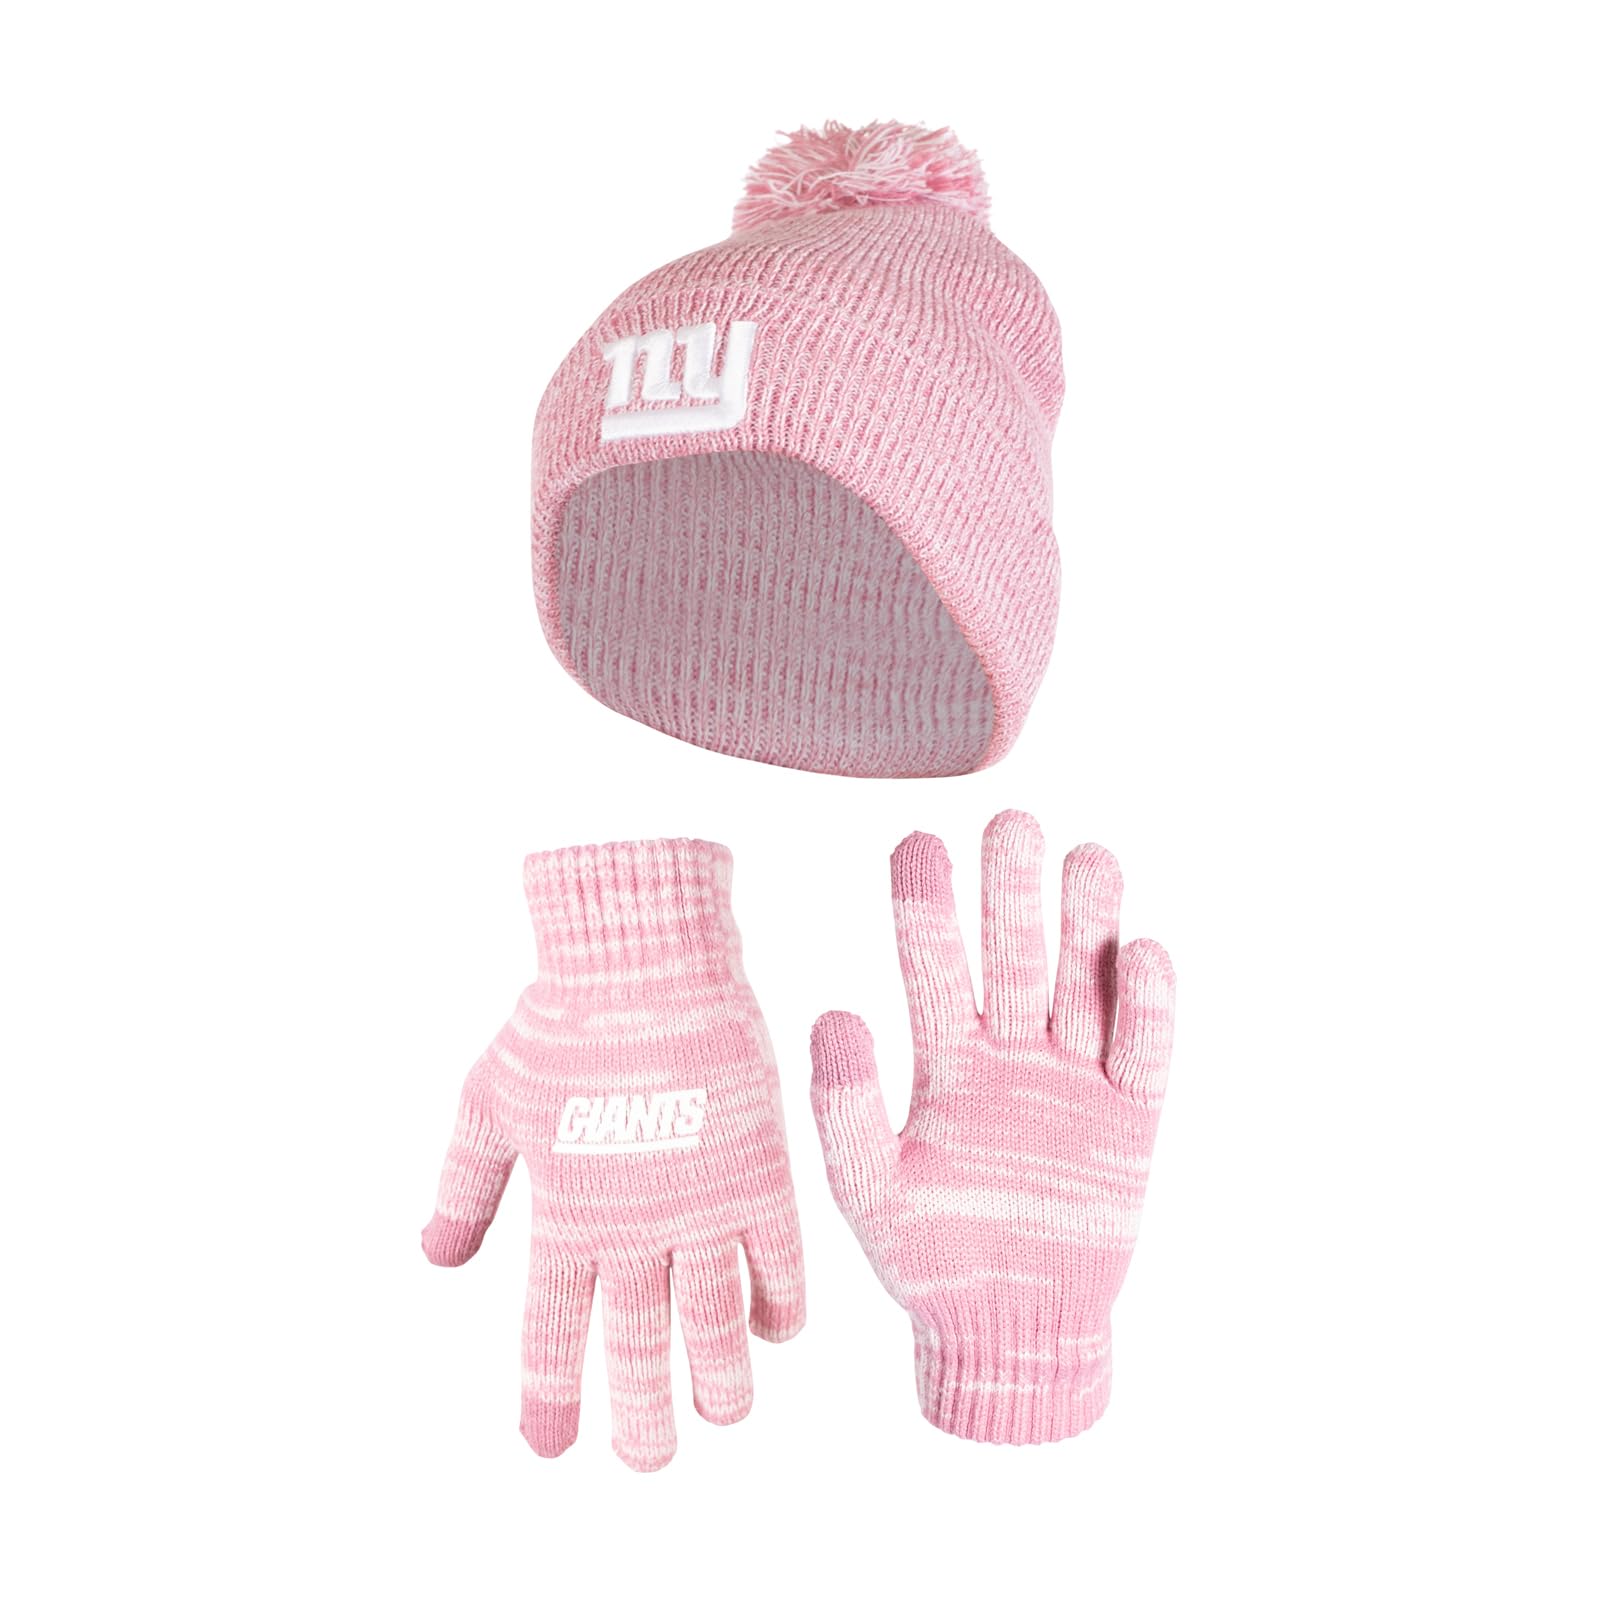 Ultra Game NFL New York Giants Womens Super Soft Pink Marl Winter Beanie Knit Hat with Extra Warm Touch Screen Gloves|New York Giants - UltraGameShop